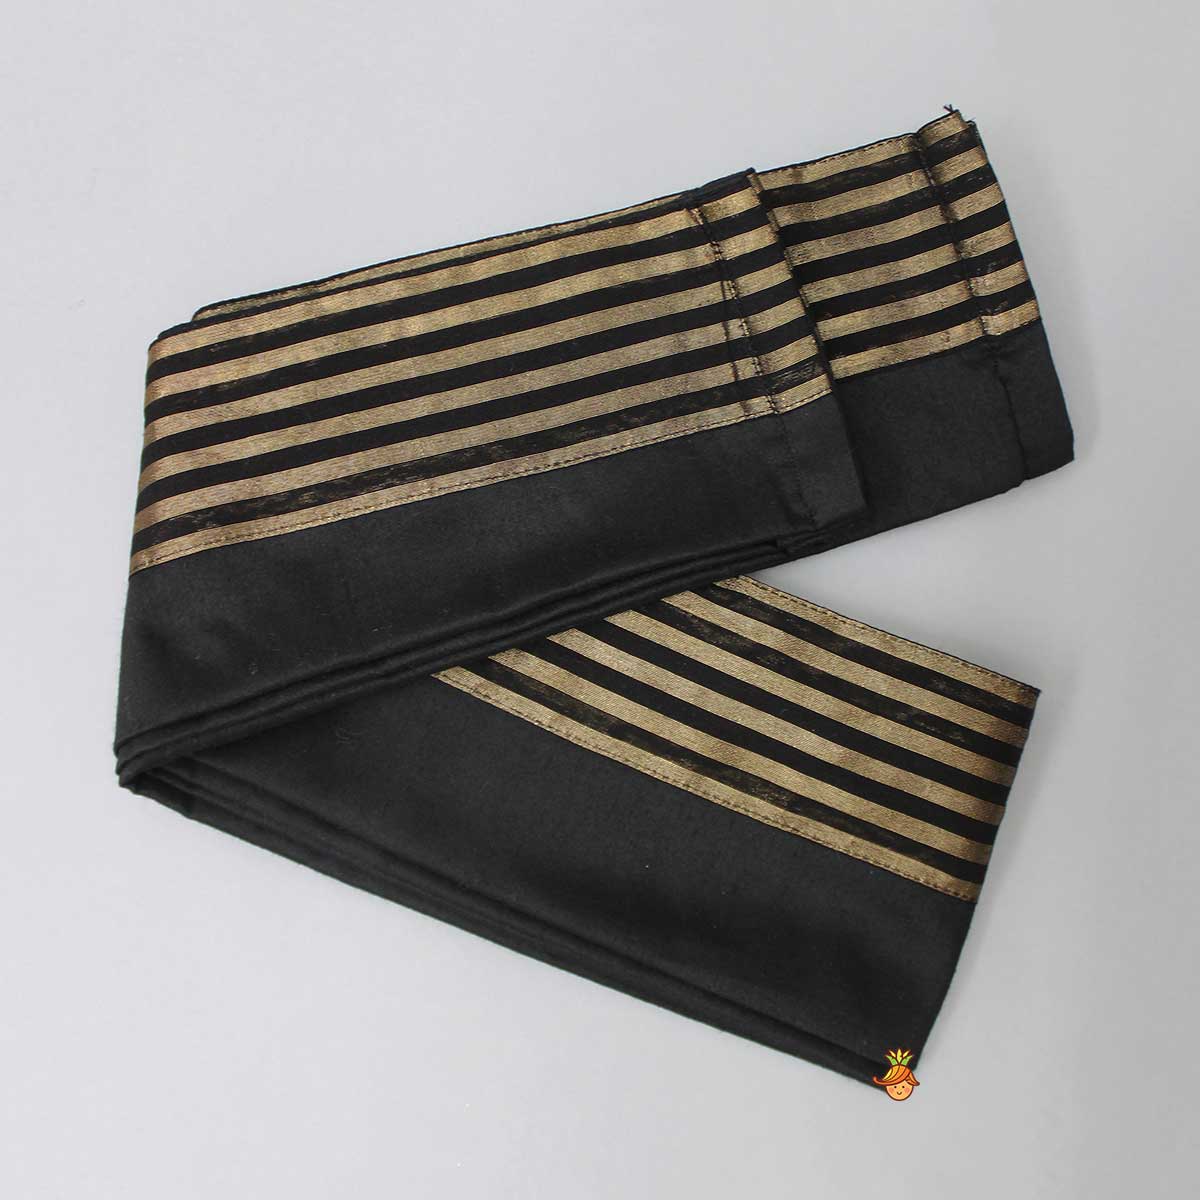 Exquisite Black Shirt And Stitched Lungi With Shawl